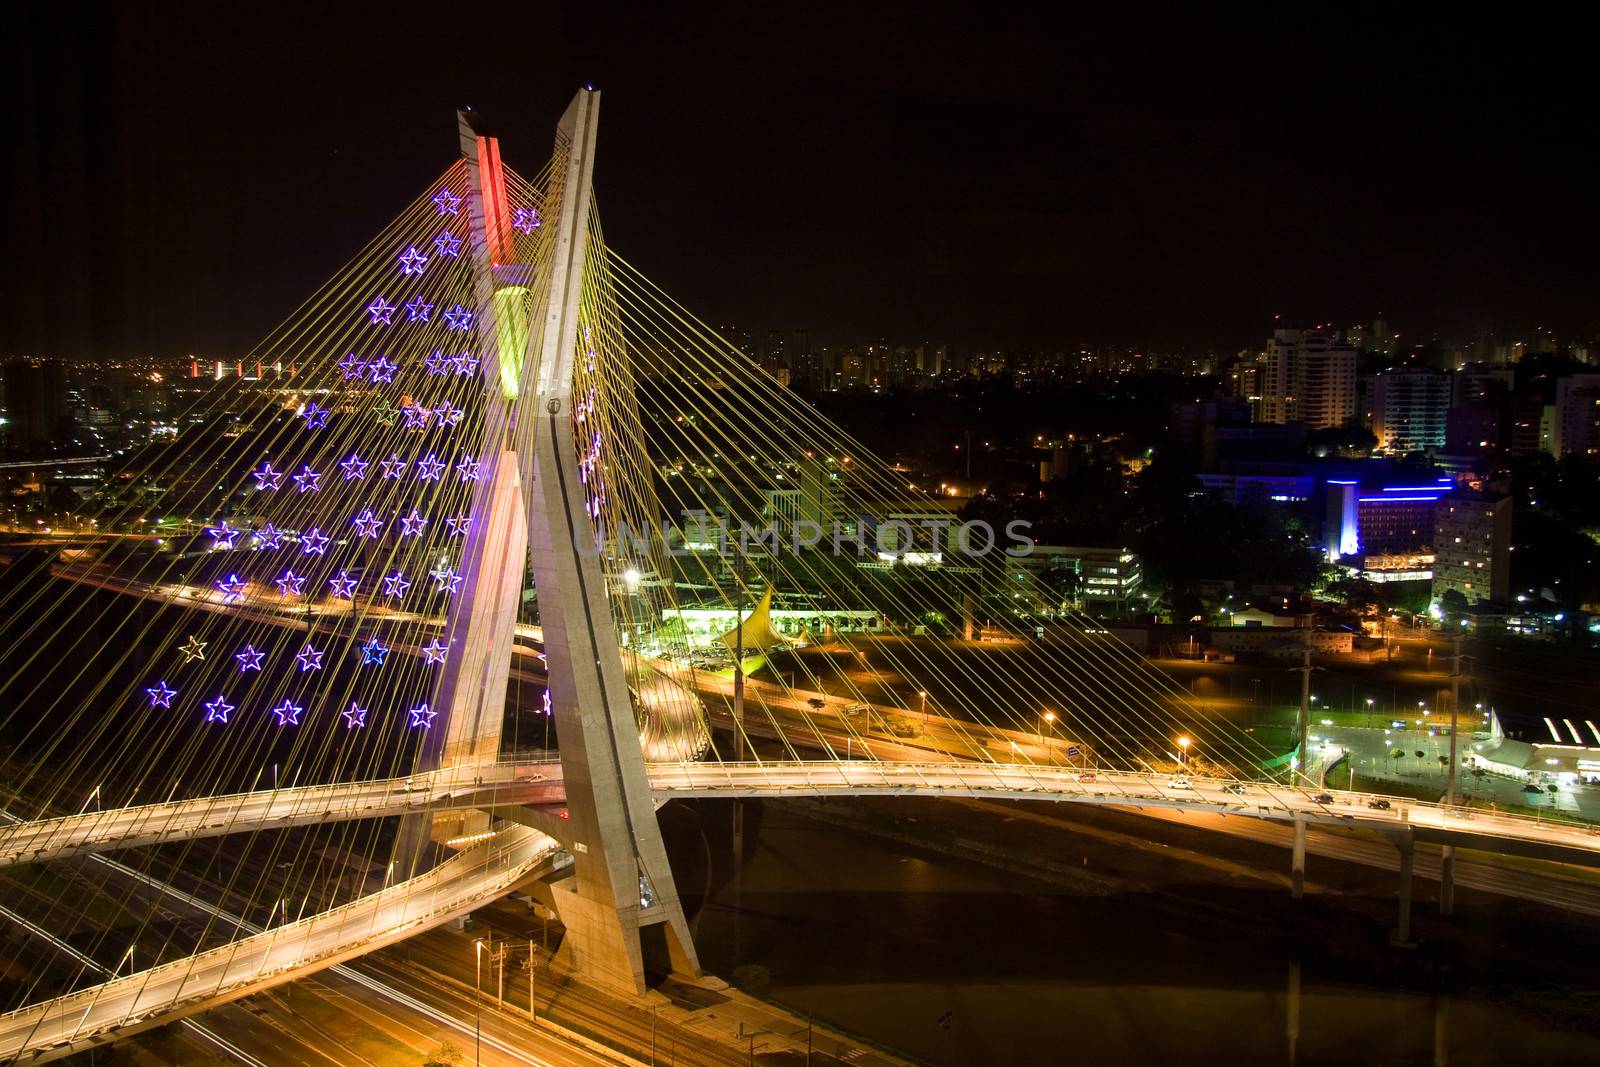 Picture of an awesome bridge built over the Pinheiros River in the city of Sao Paulo, Brazil